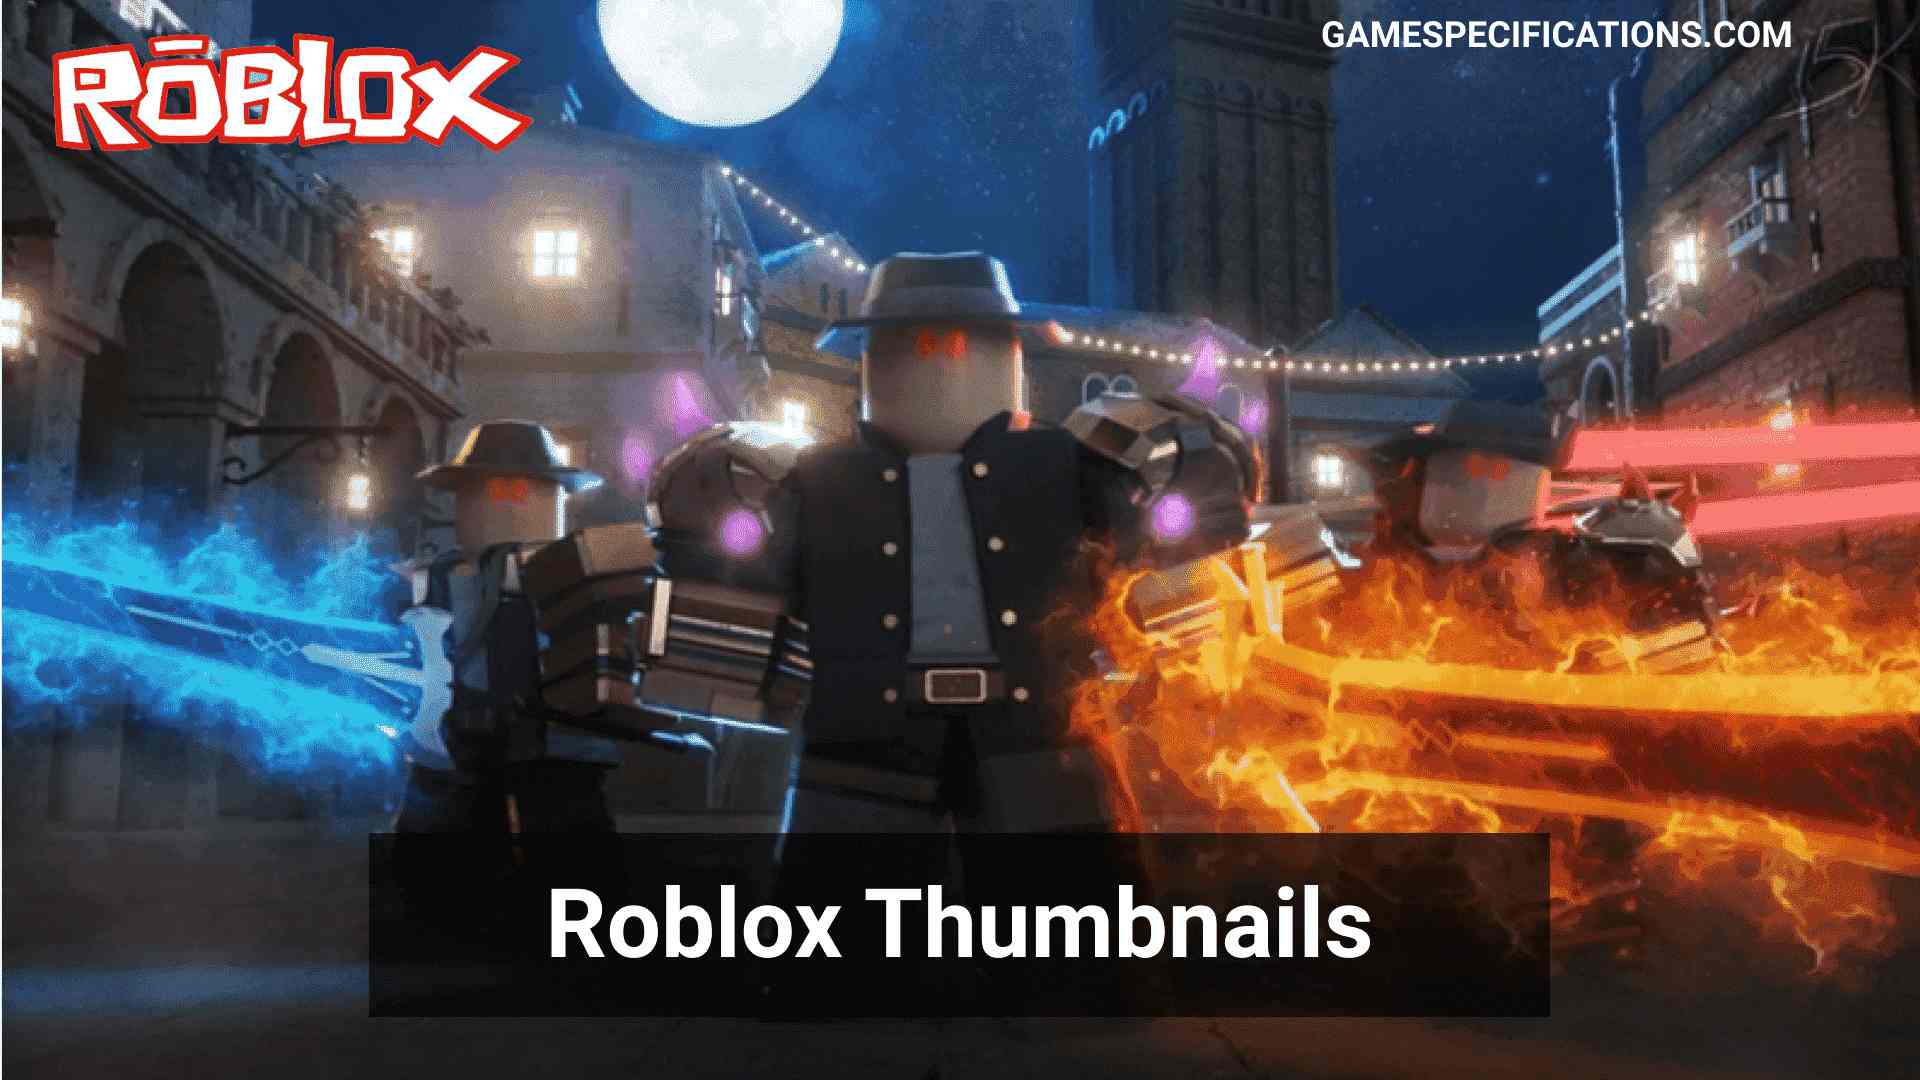 Roblox Thumbnails An Ultimate Guide On Awesome Thumbnails Generation 2021 Game Specifications - roblox gam thumbnail